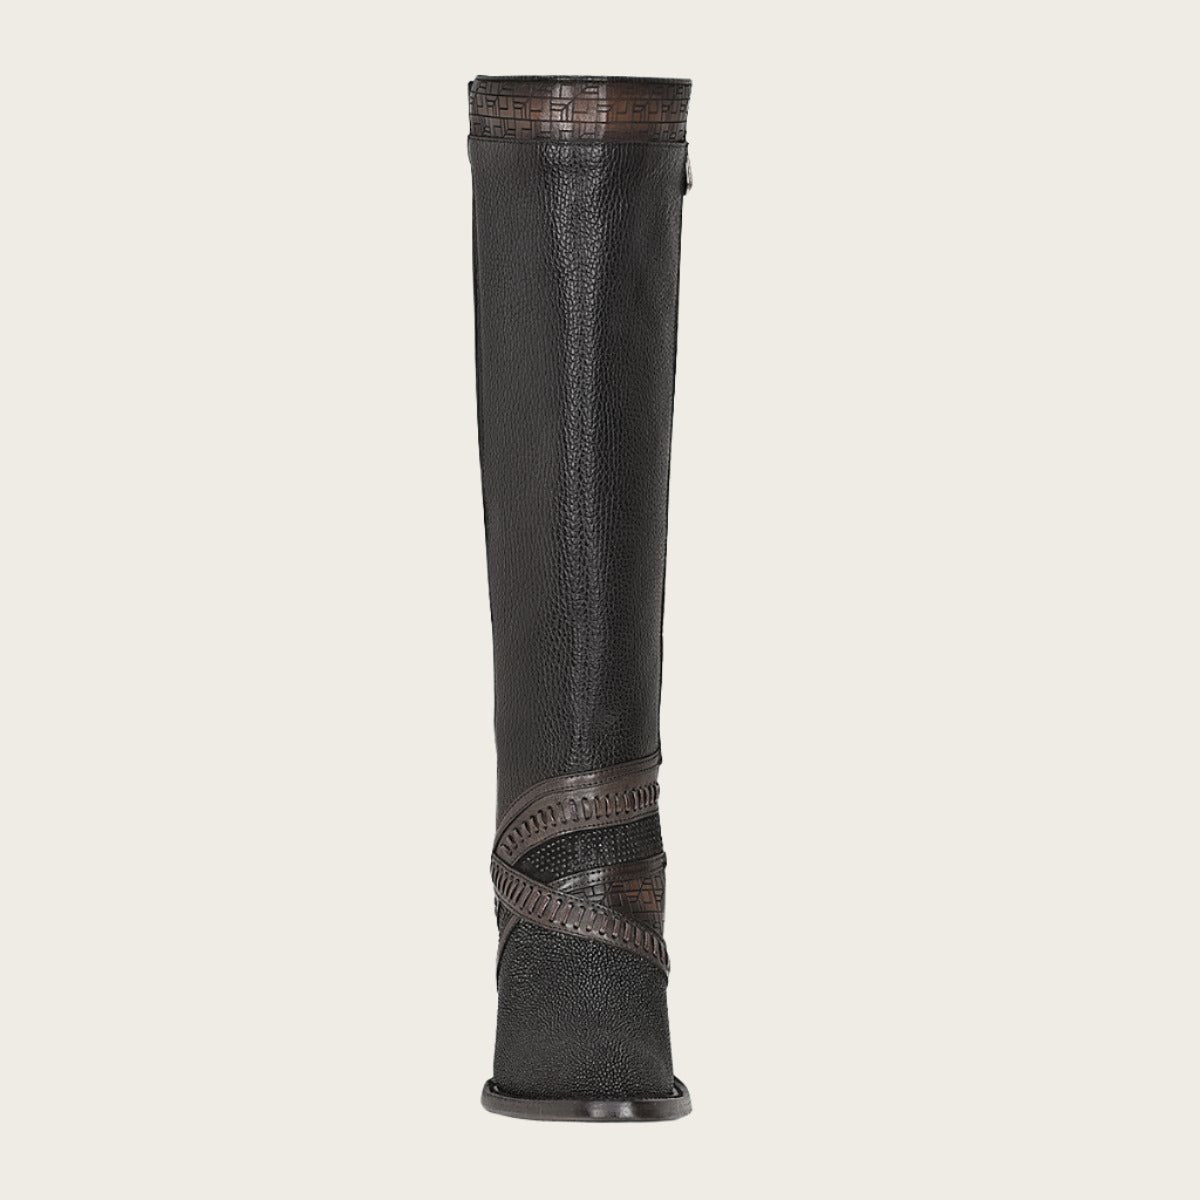 Black exotic riding boot with hand-woven details